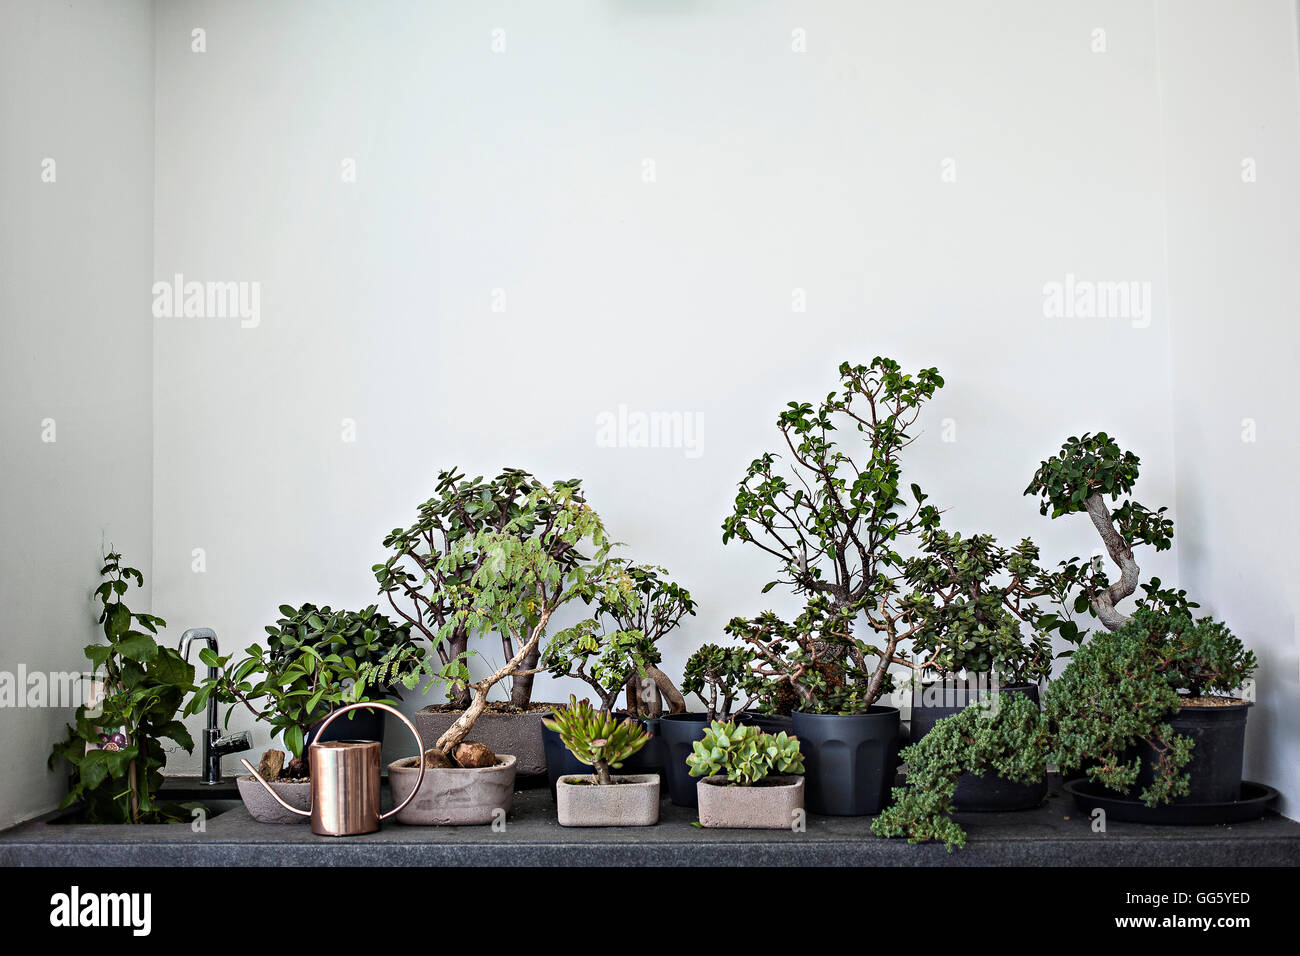 Potted plants in domestic garden Stock Photo